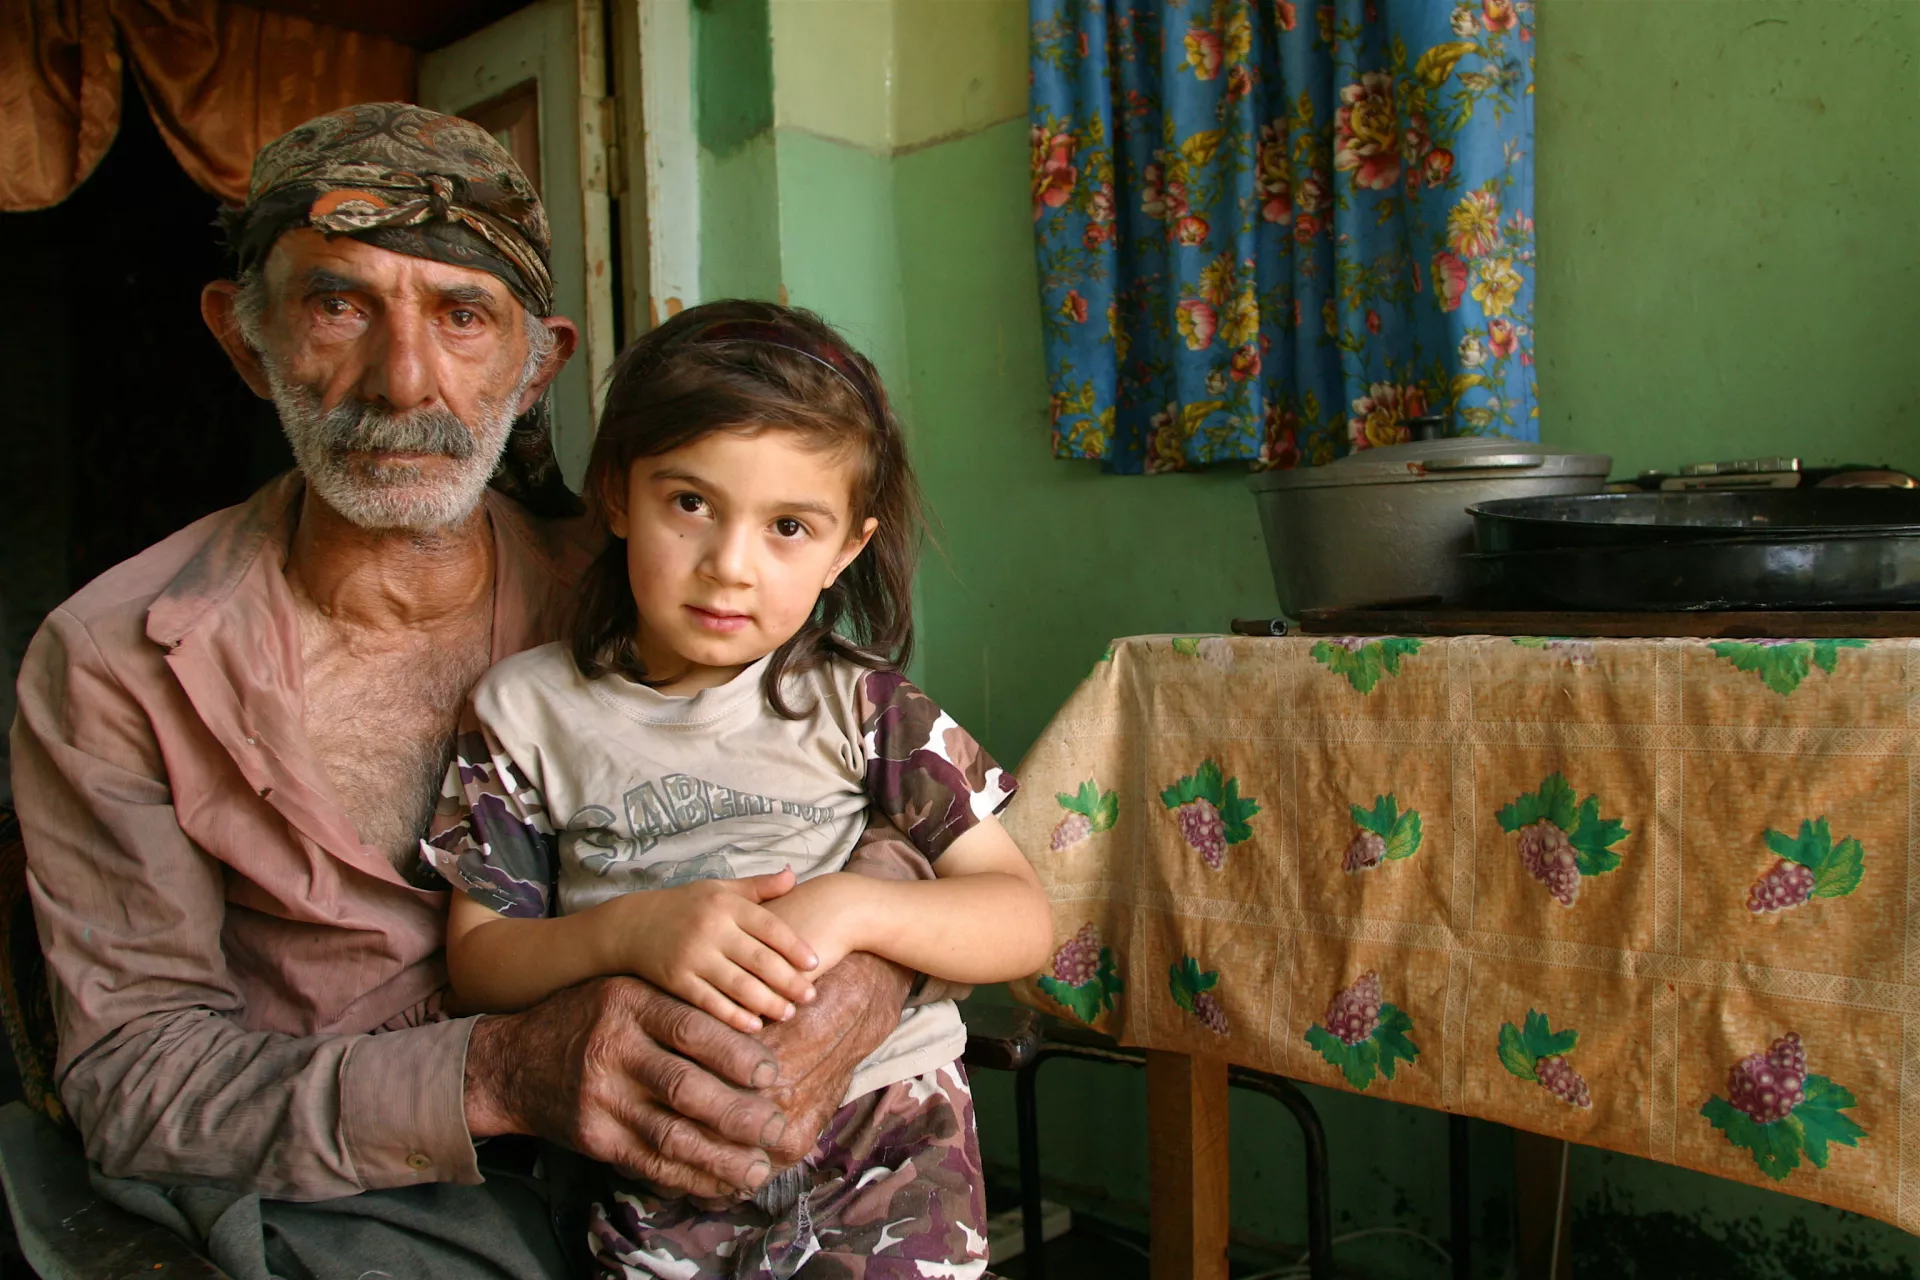 A girl stands by her father at their home.